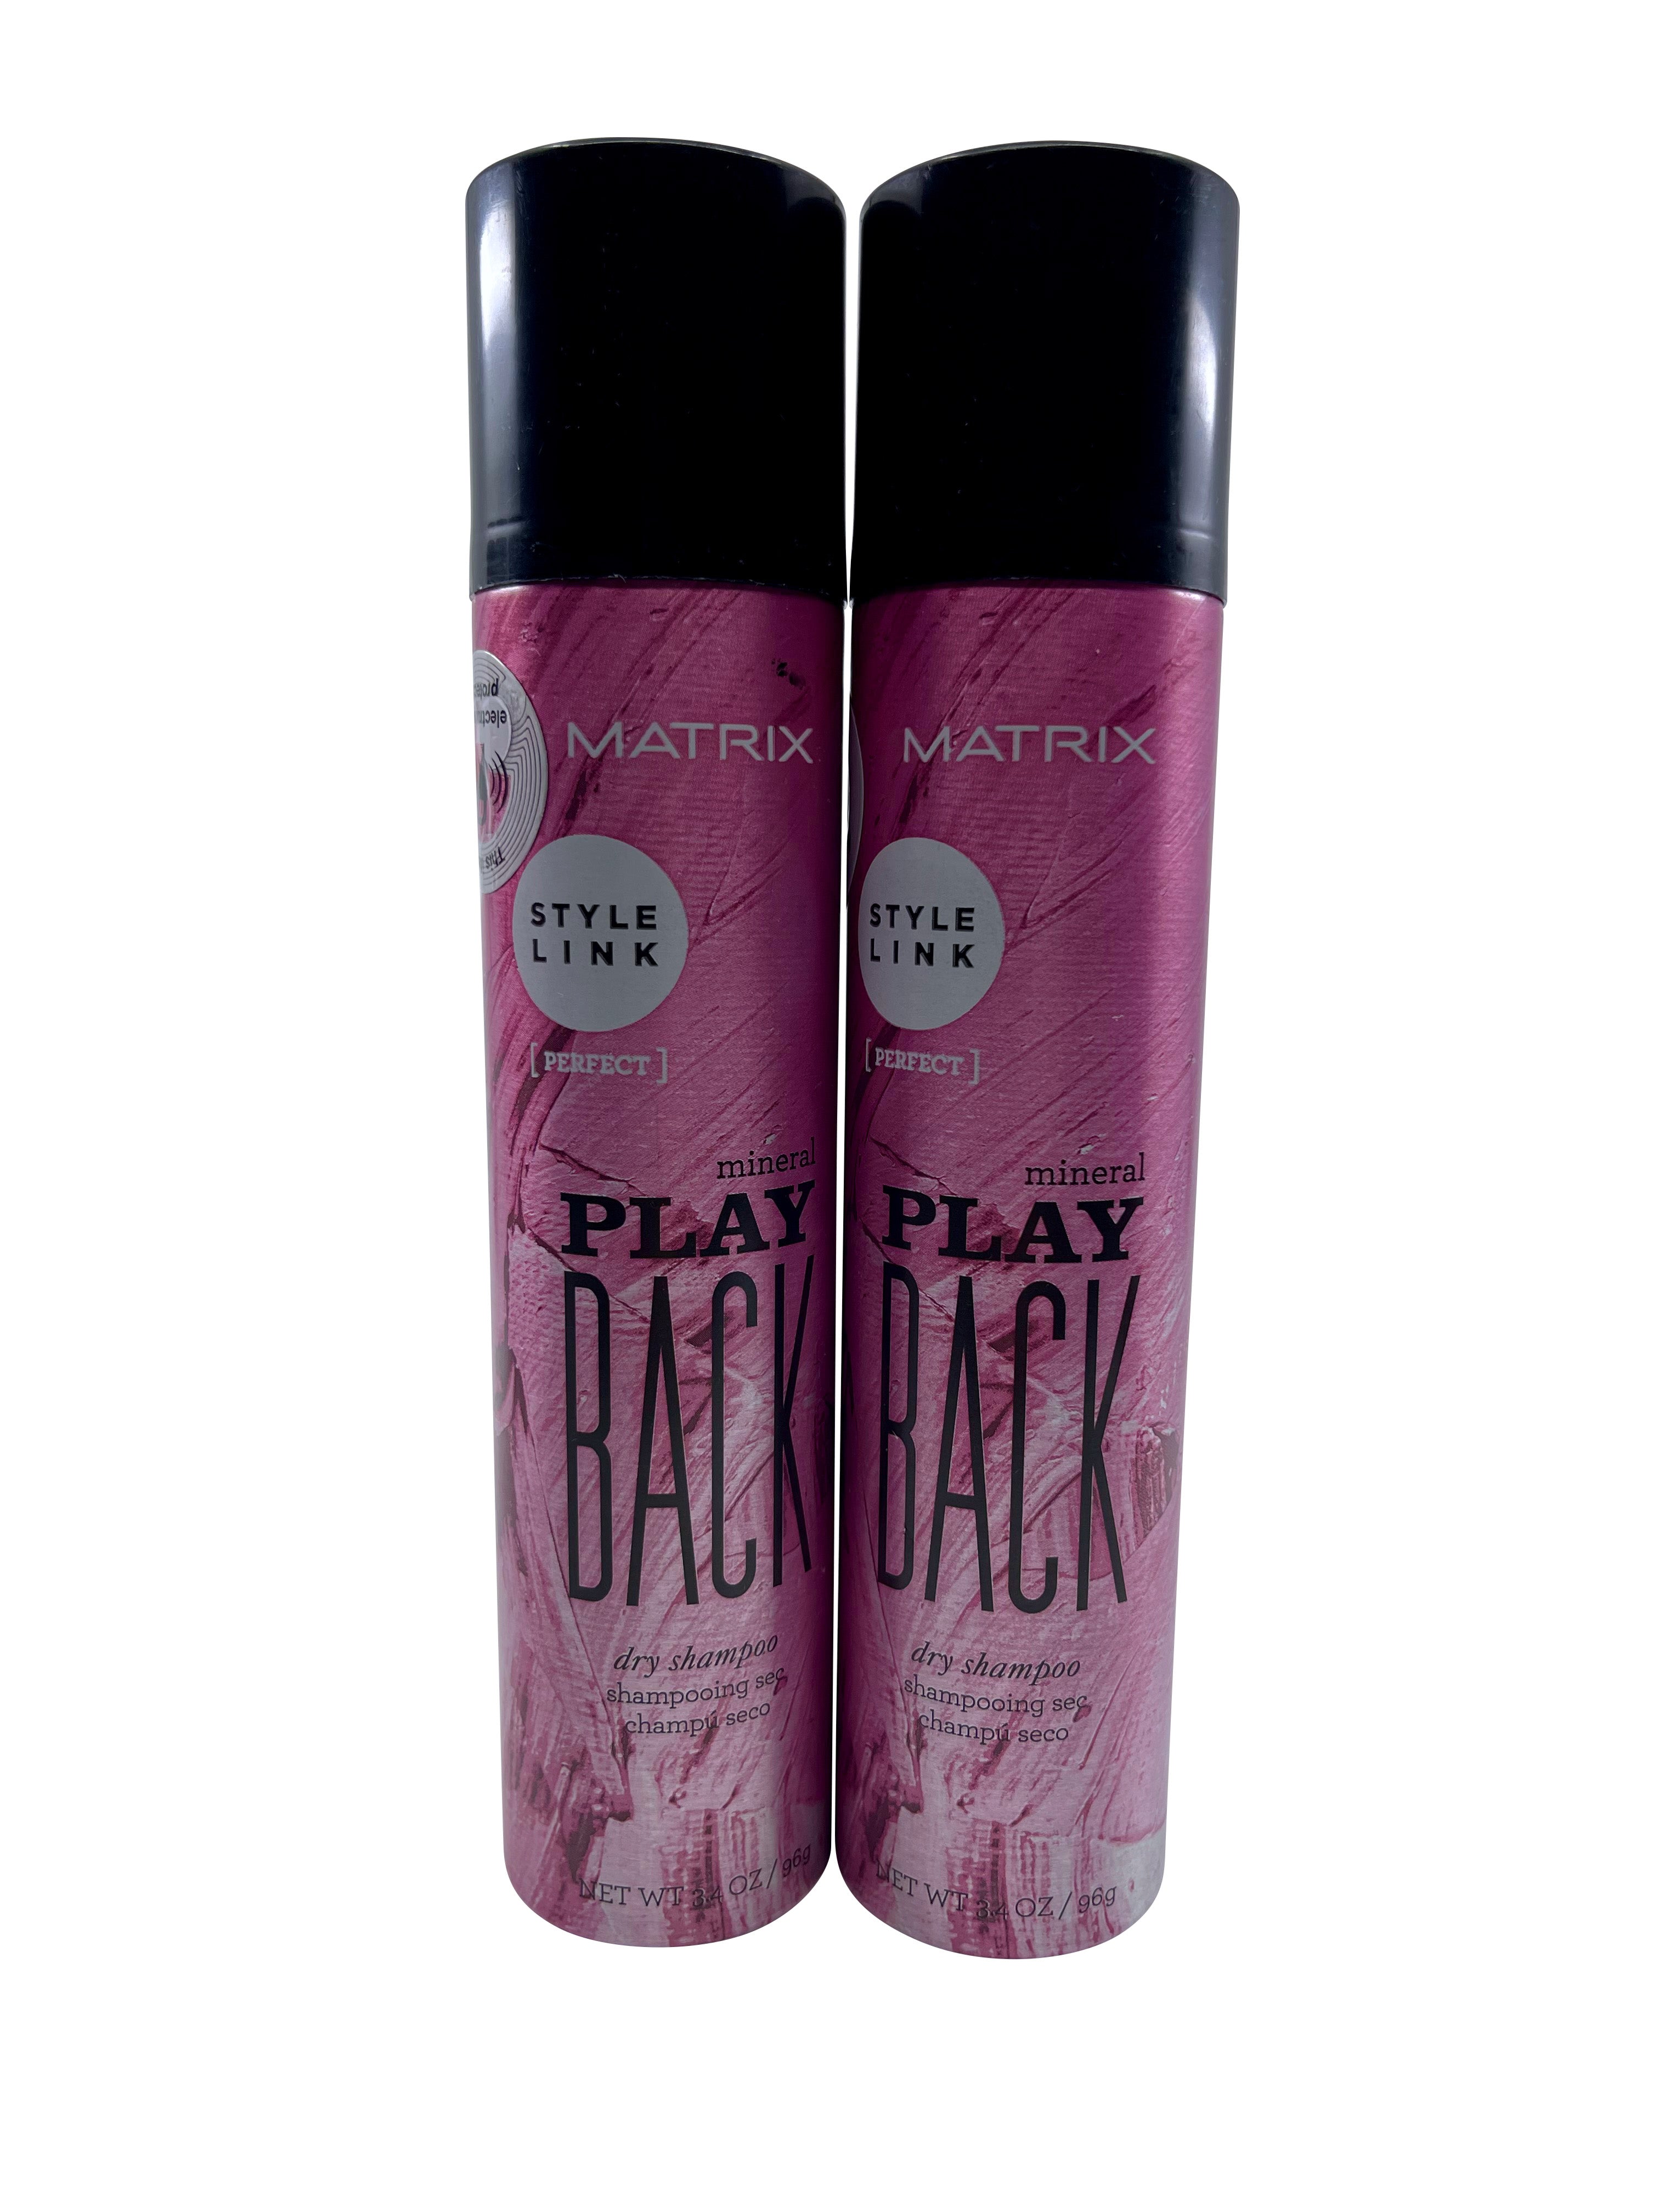 Matrix Style Link Play Back Mineral Dry Shampoo 3.4 OZ Set of 2 One Size